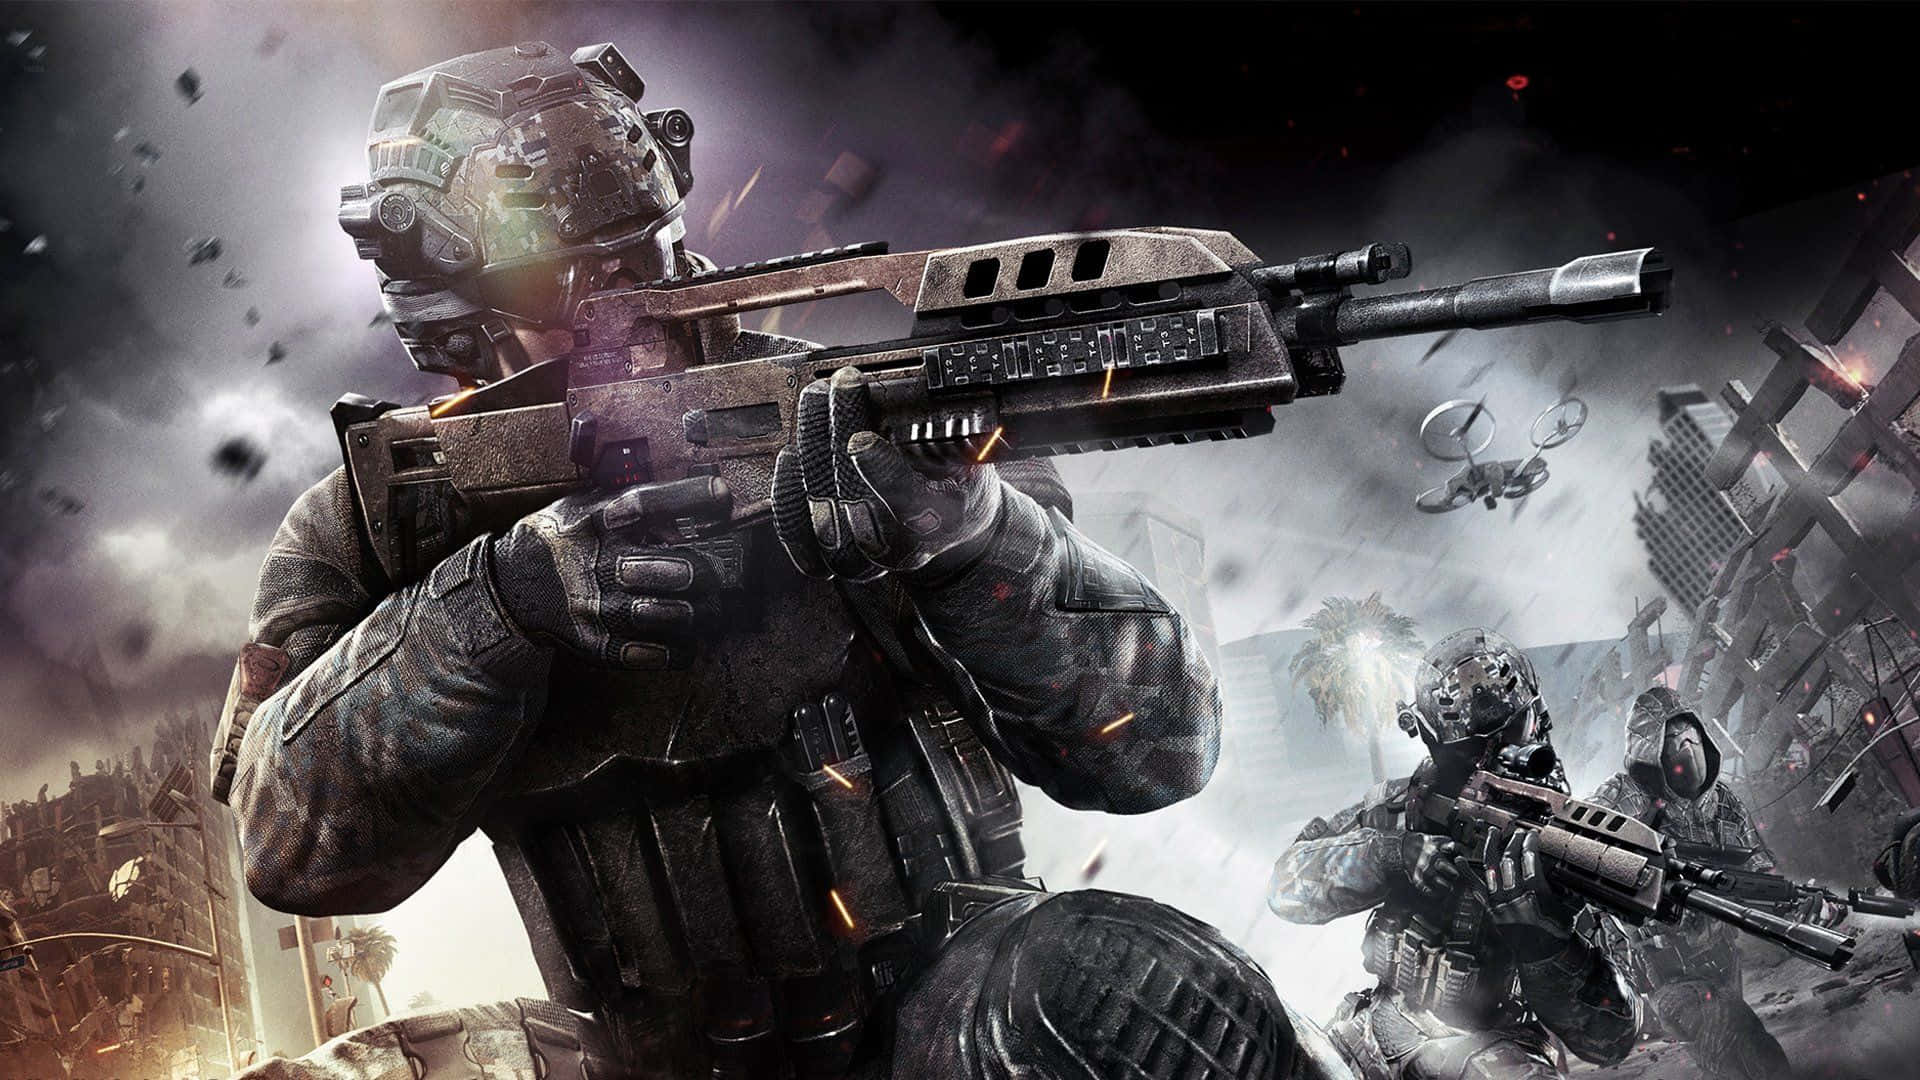 Experience the life of a soldier in Call of Duty